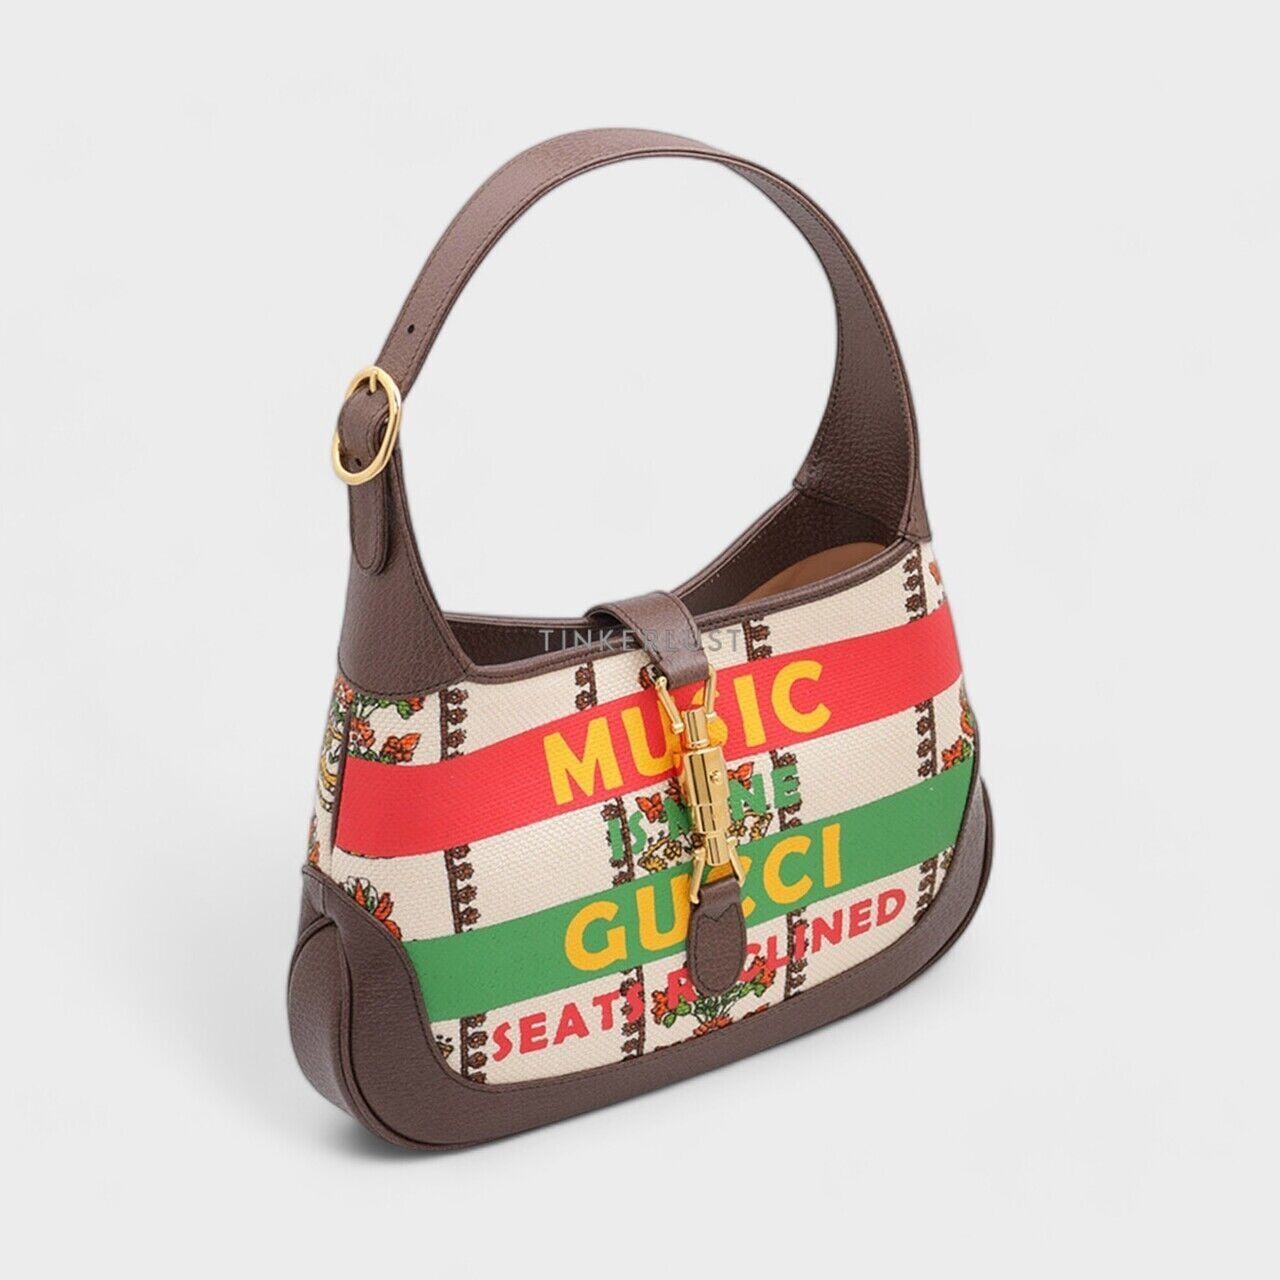 Gucci Small 100 'Music is Mine Gucci Seats Reclined' Jackie 1961 Shoulder Bag in Off White/Ebony Shoulder Bag